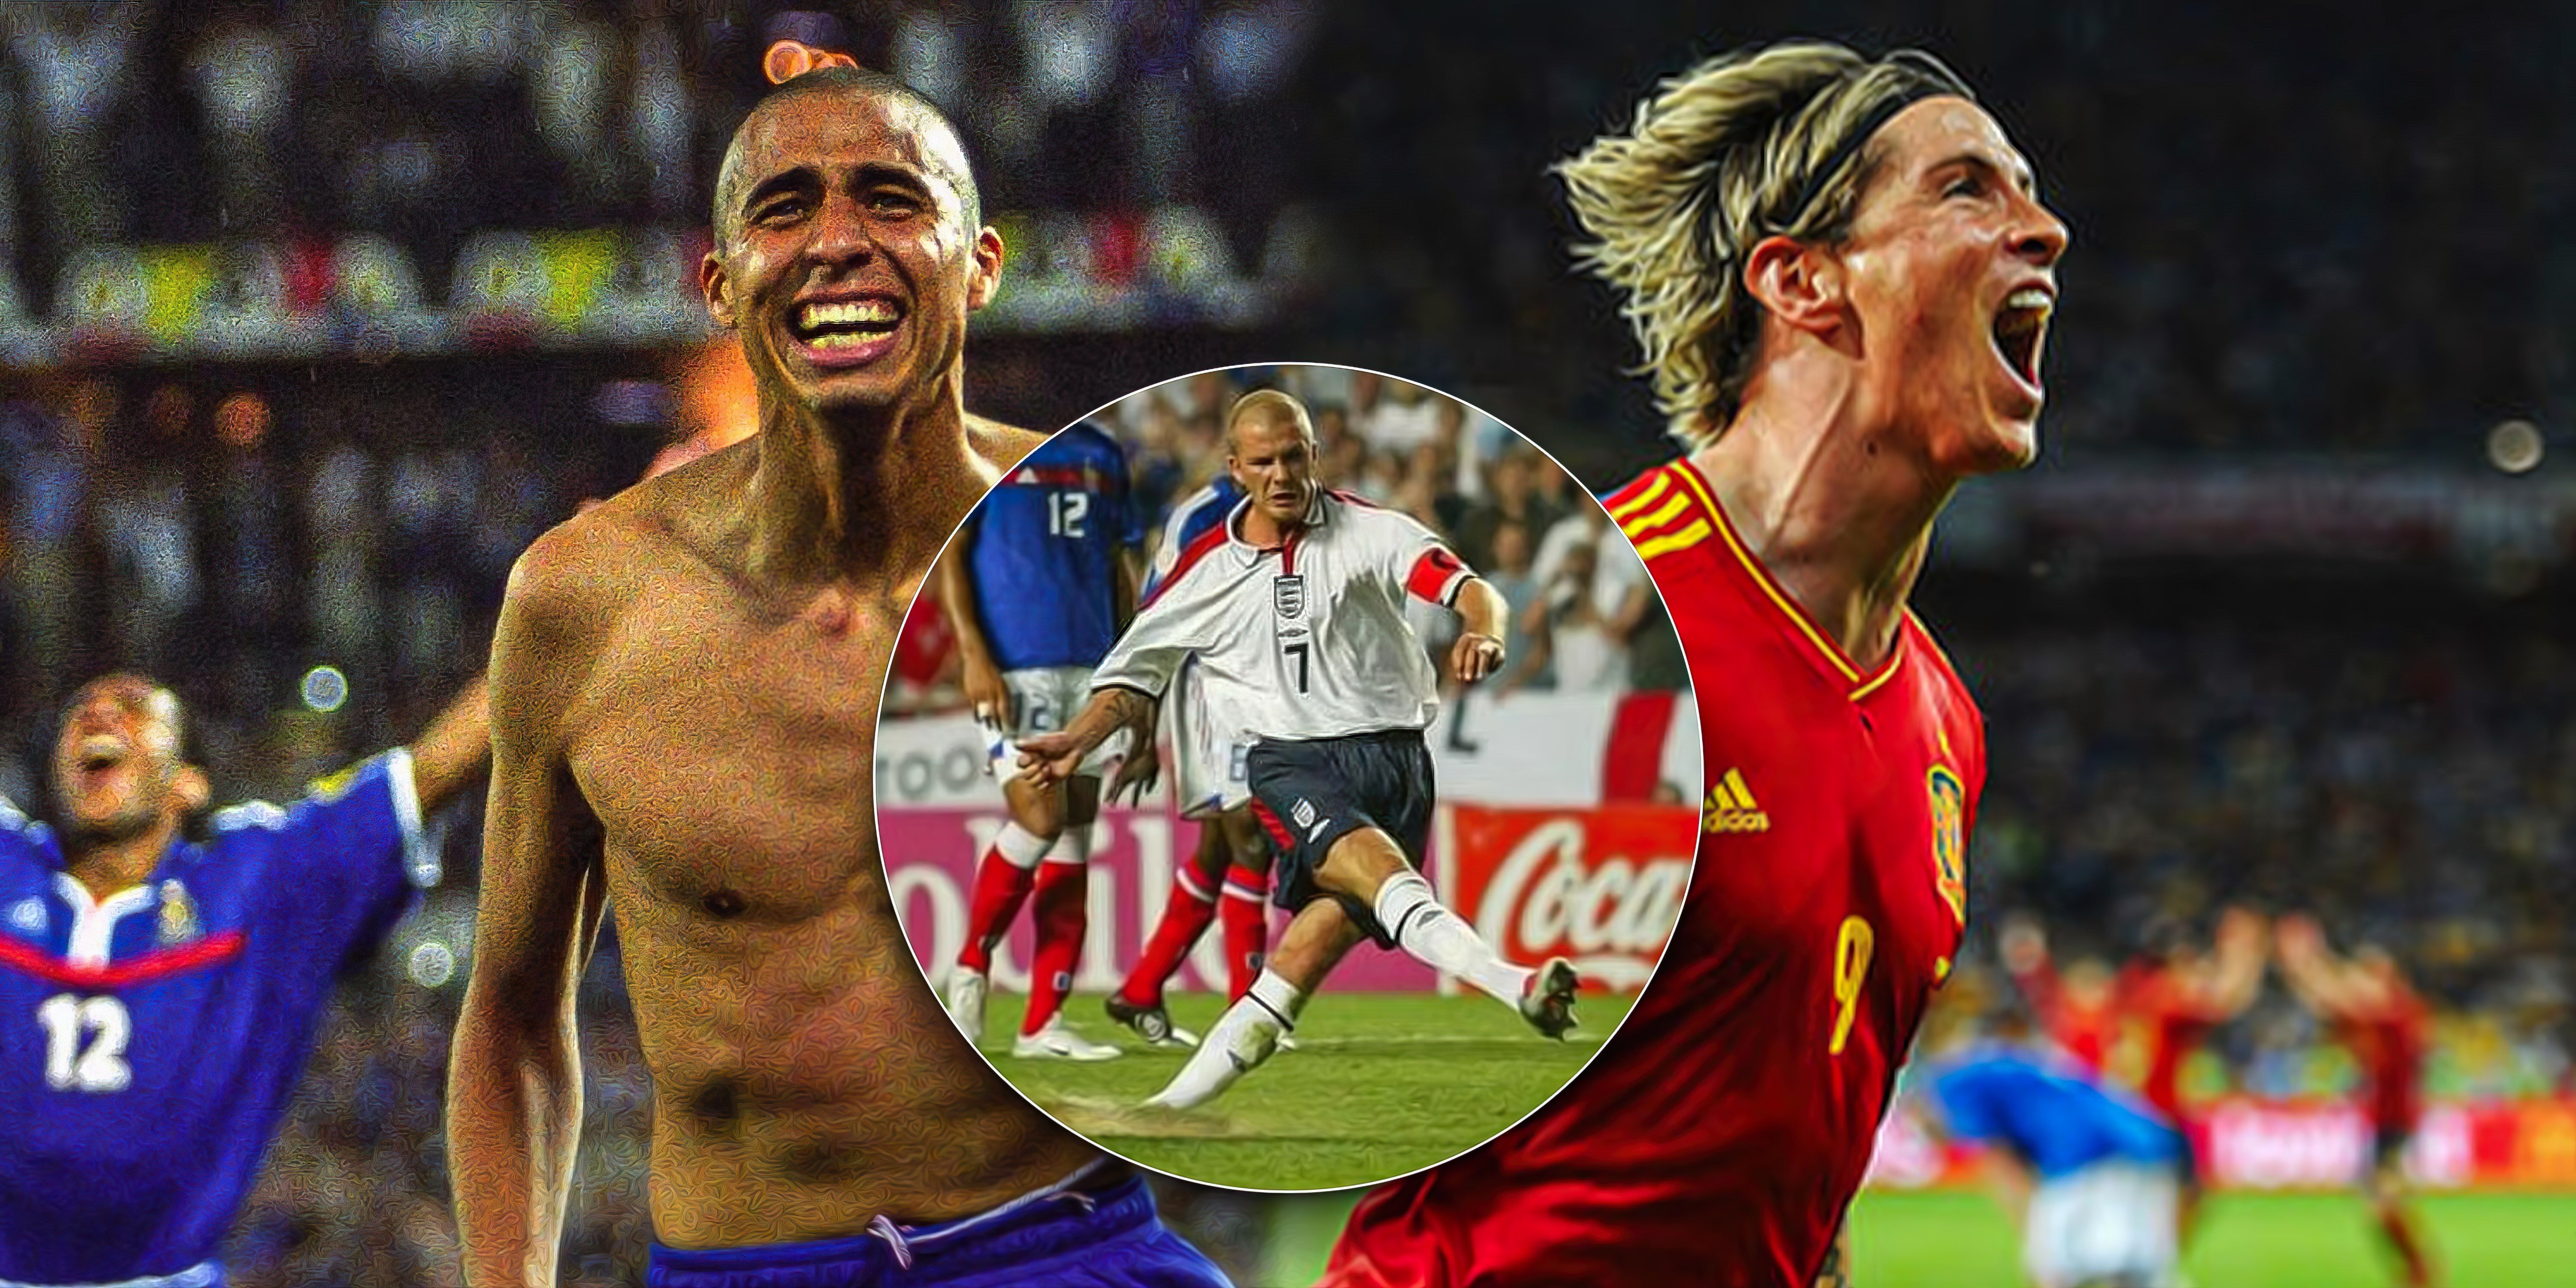 Ranking the greatest games in Euros history featuring France's David Trezeguet, England's David Beckham and Spain's Fernando Torres